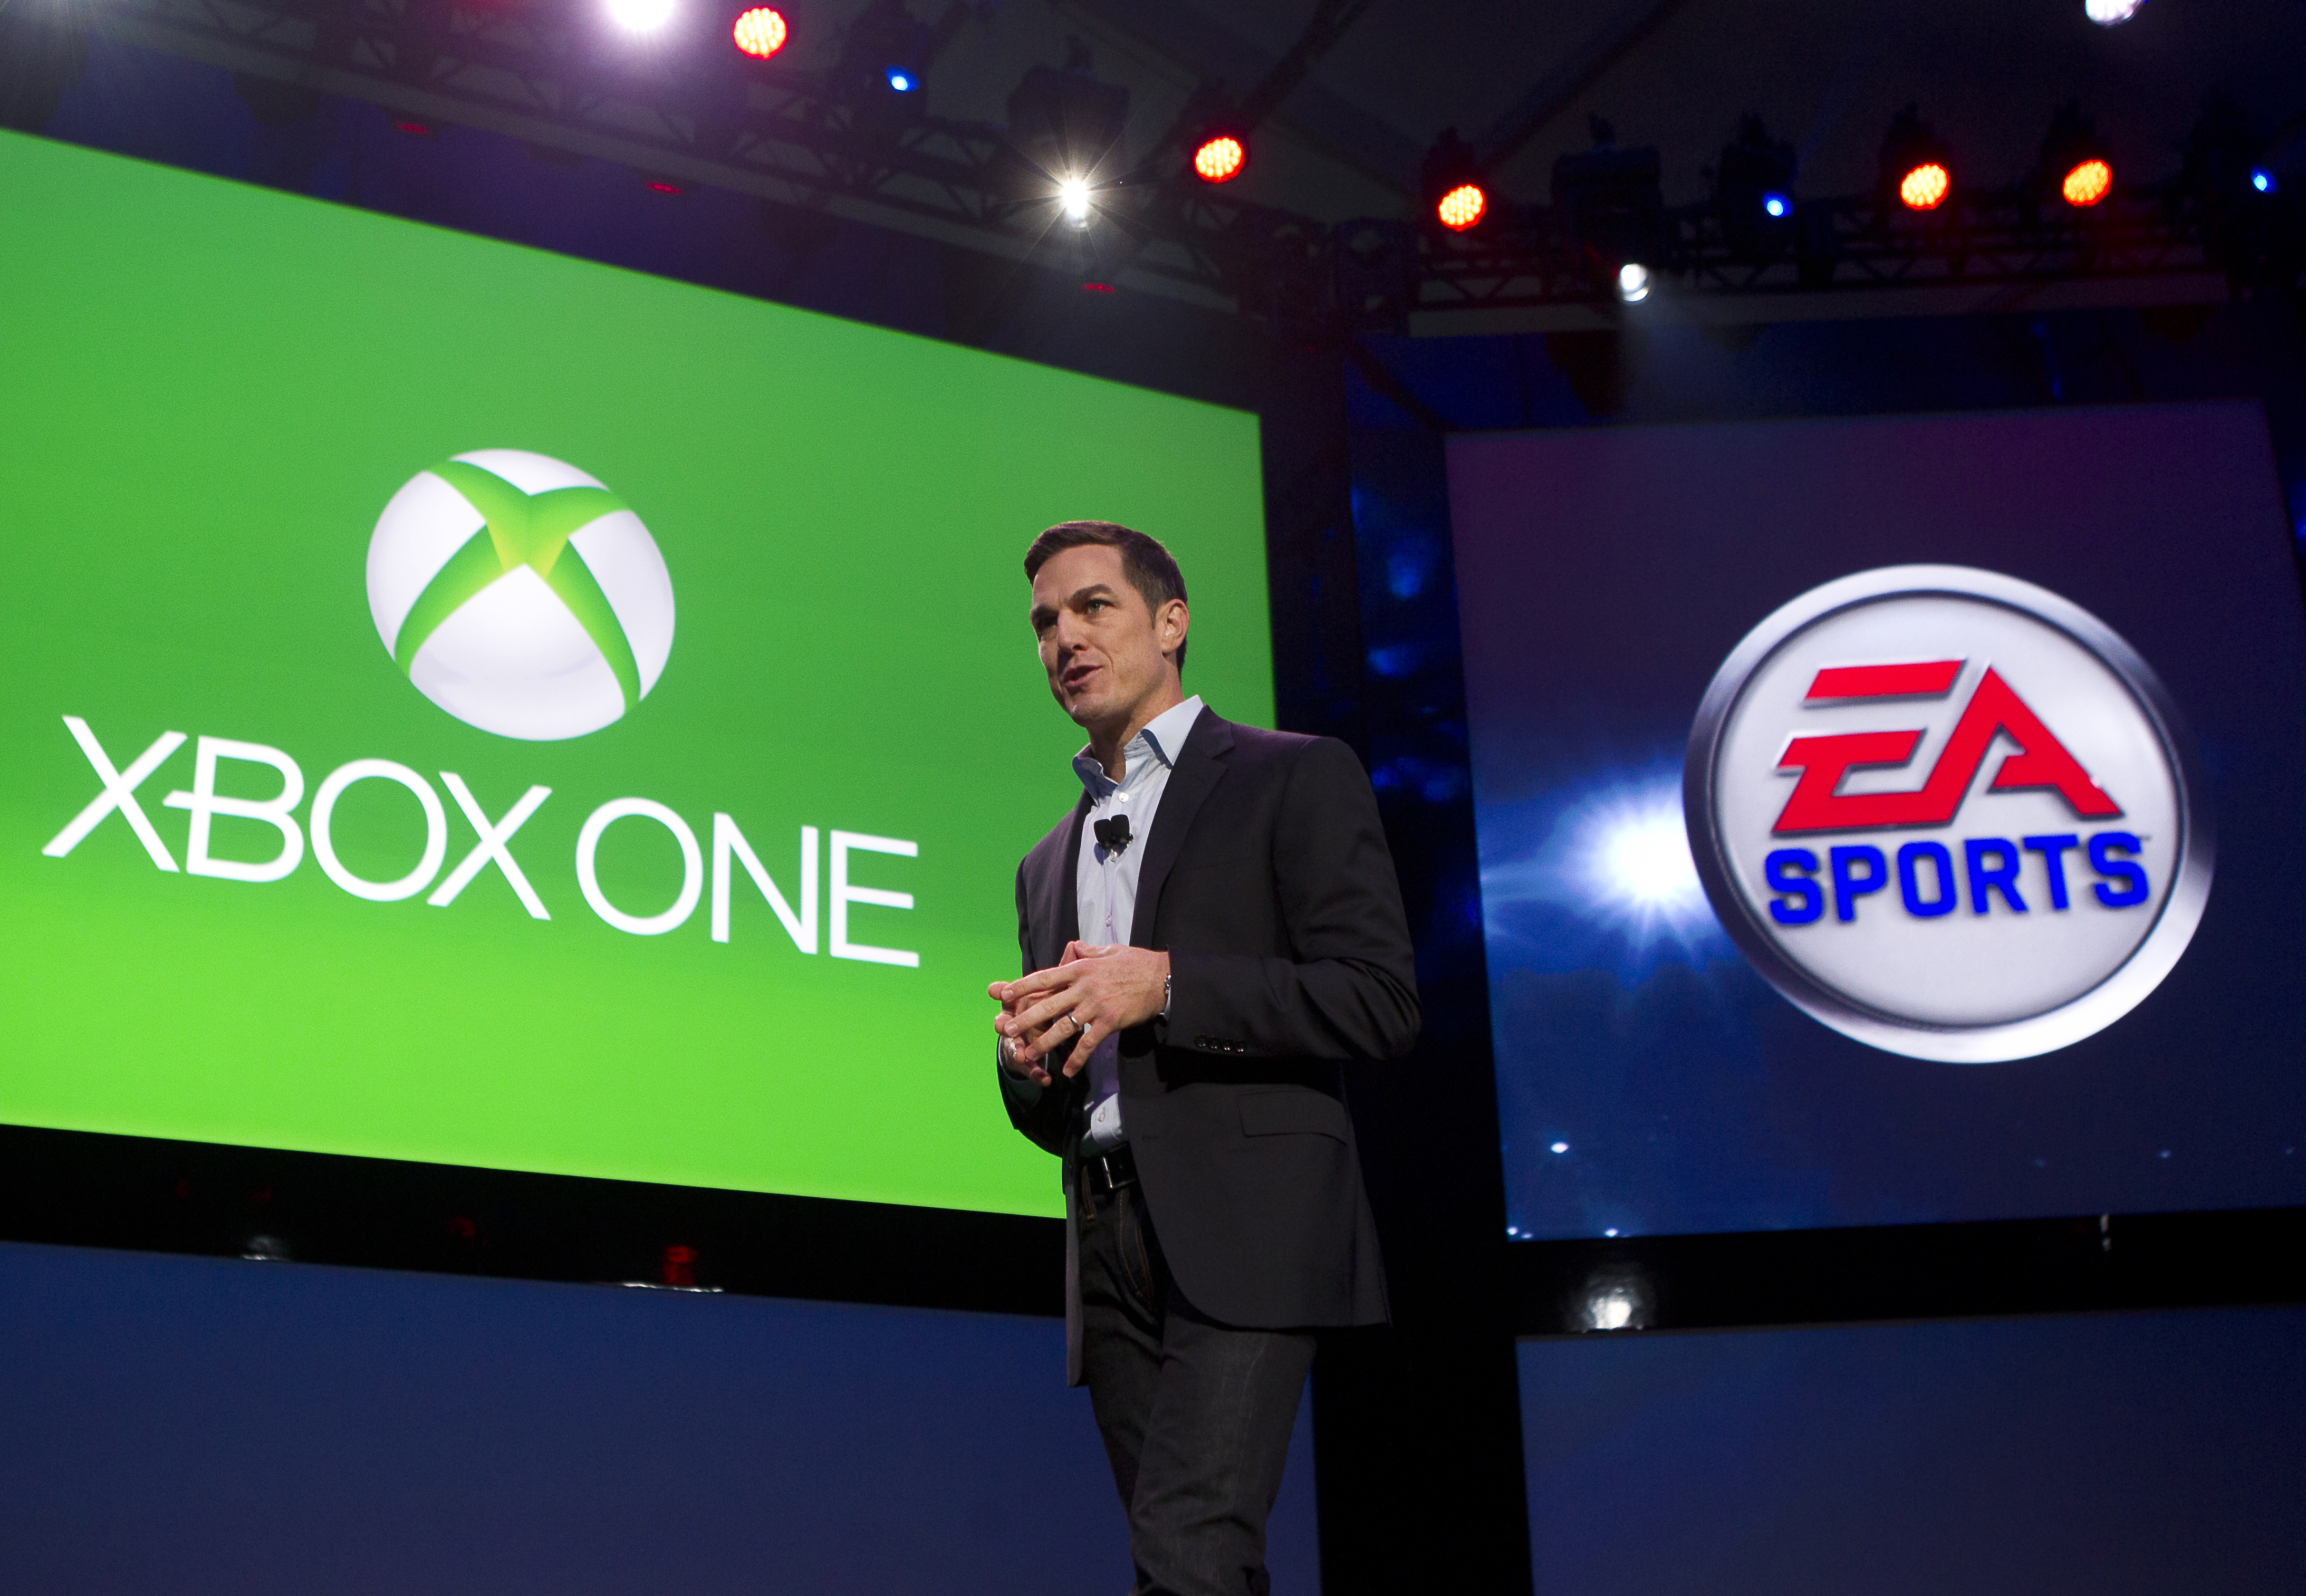 Andrew Wilson, Executive Vice President at EA Sports, unveils a new lineup of EA Sports game coming to Xbox One during Xbox reveal event, on Tuesday, May 21, 2013, in Redmond, Wash. (Photo by Stephen Brashear/Invision for Microsoft/AP Images)